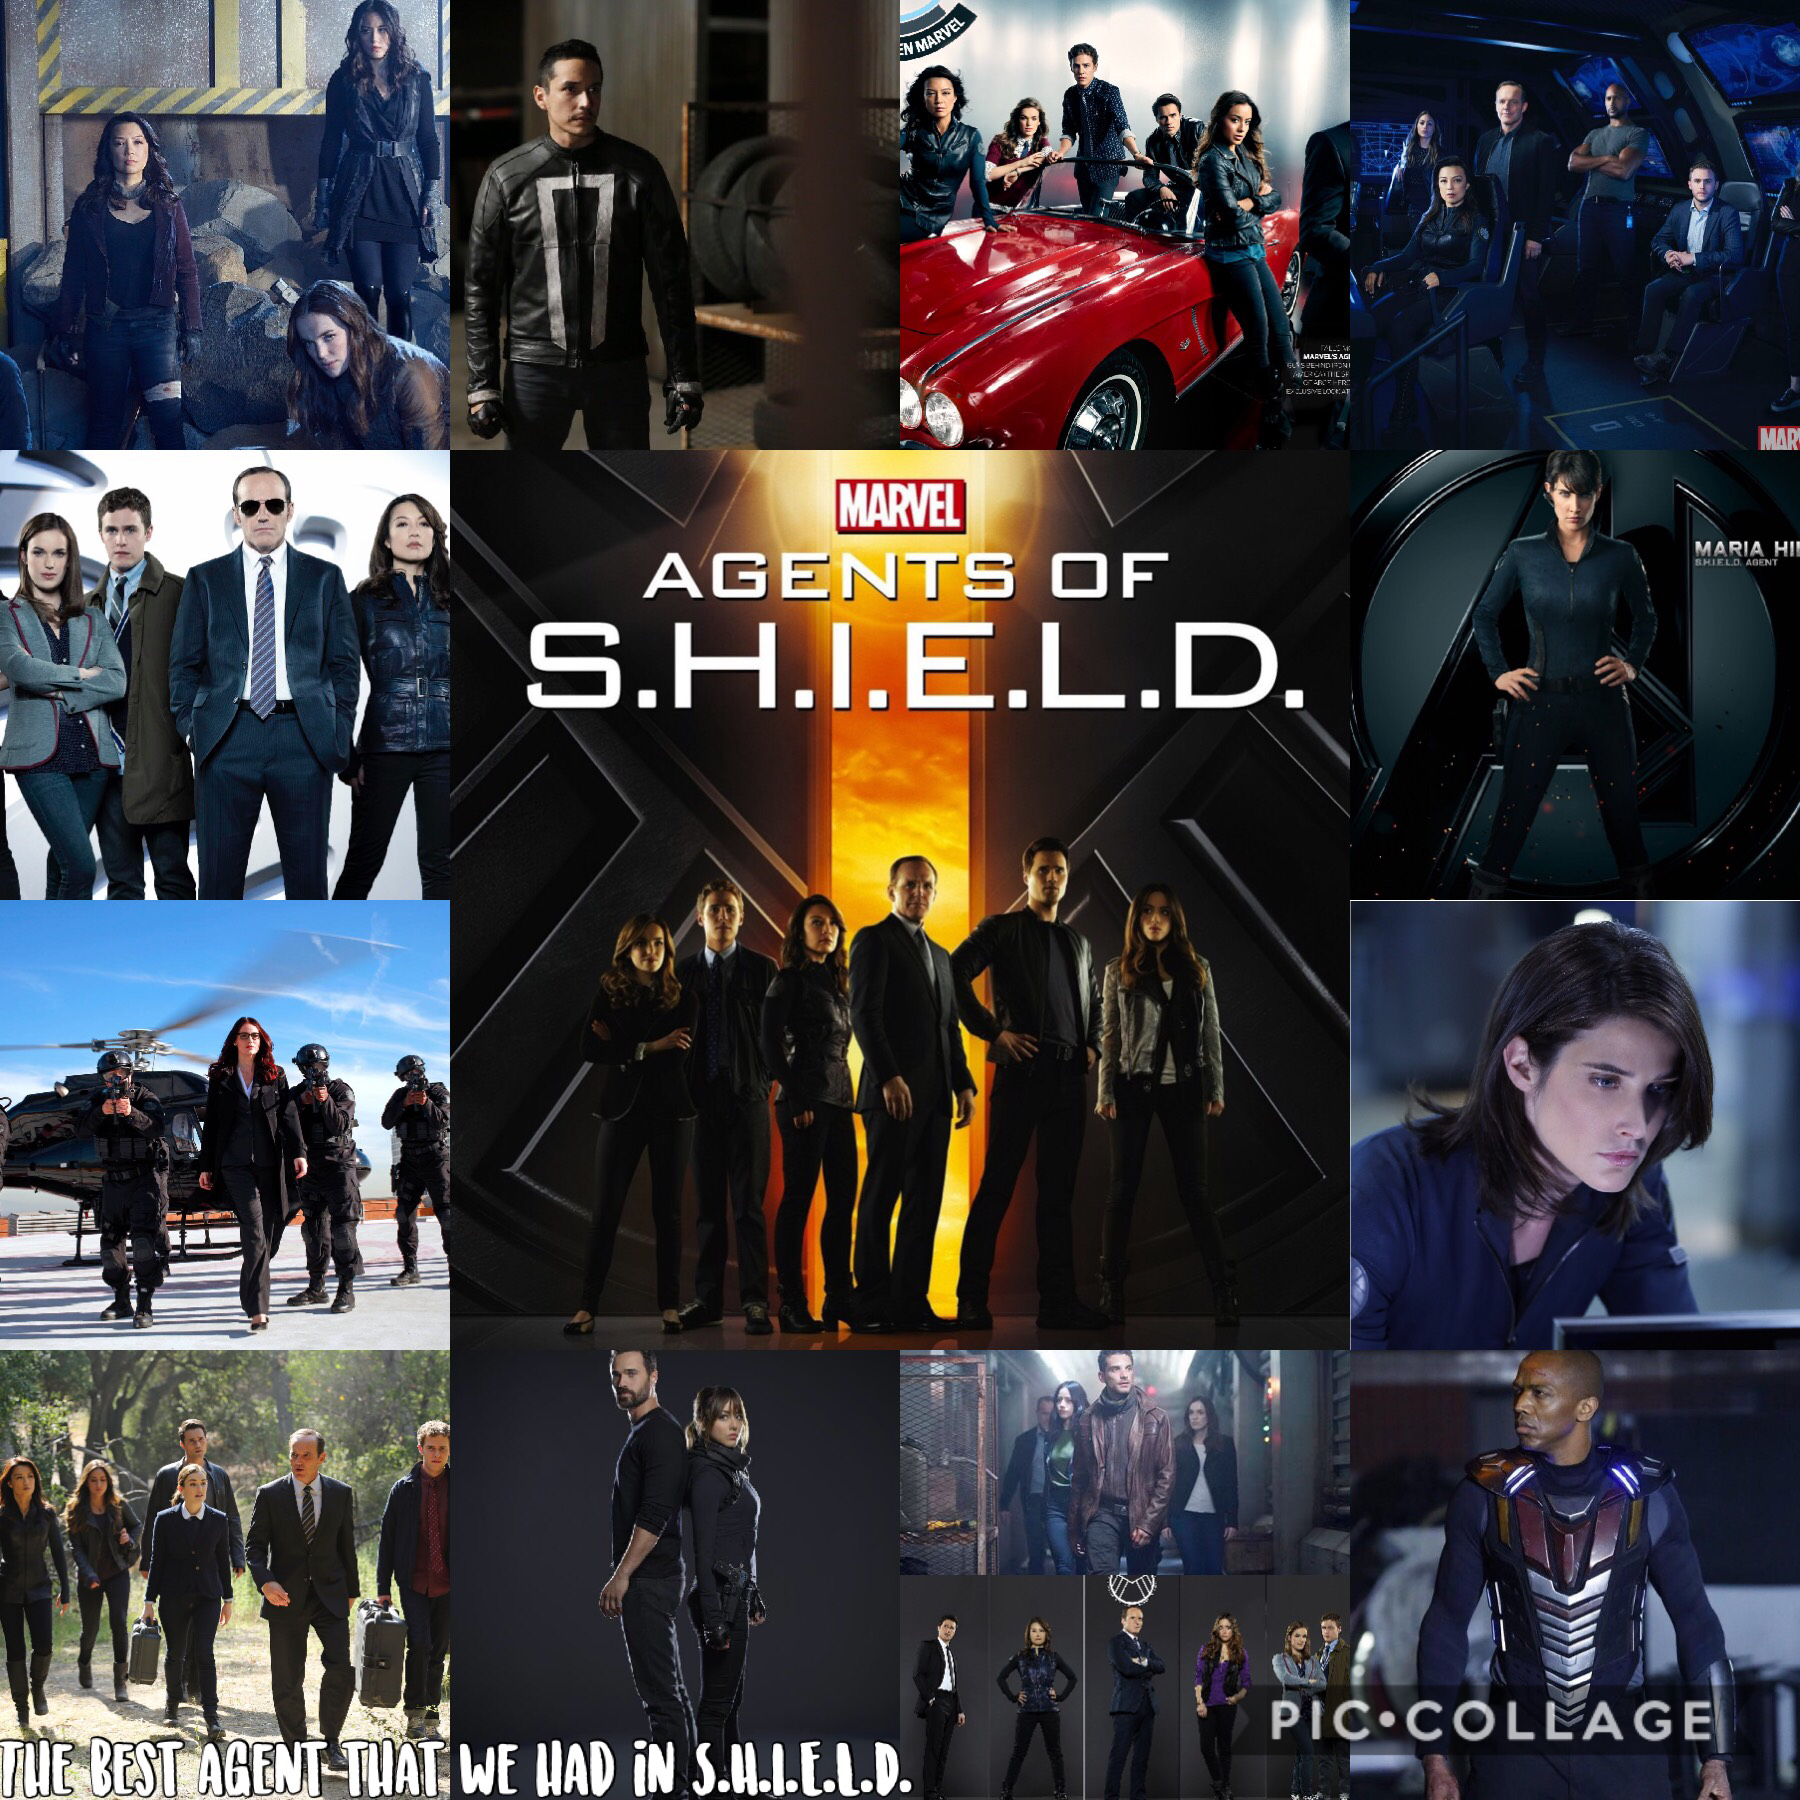 Absolutely the best agents in Shield.